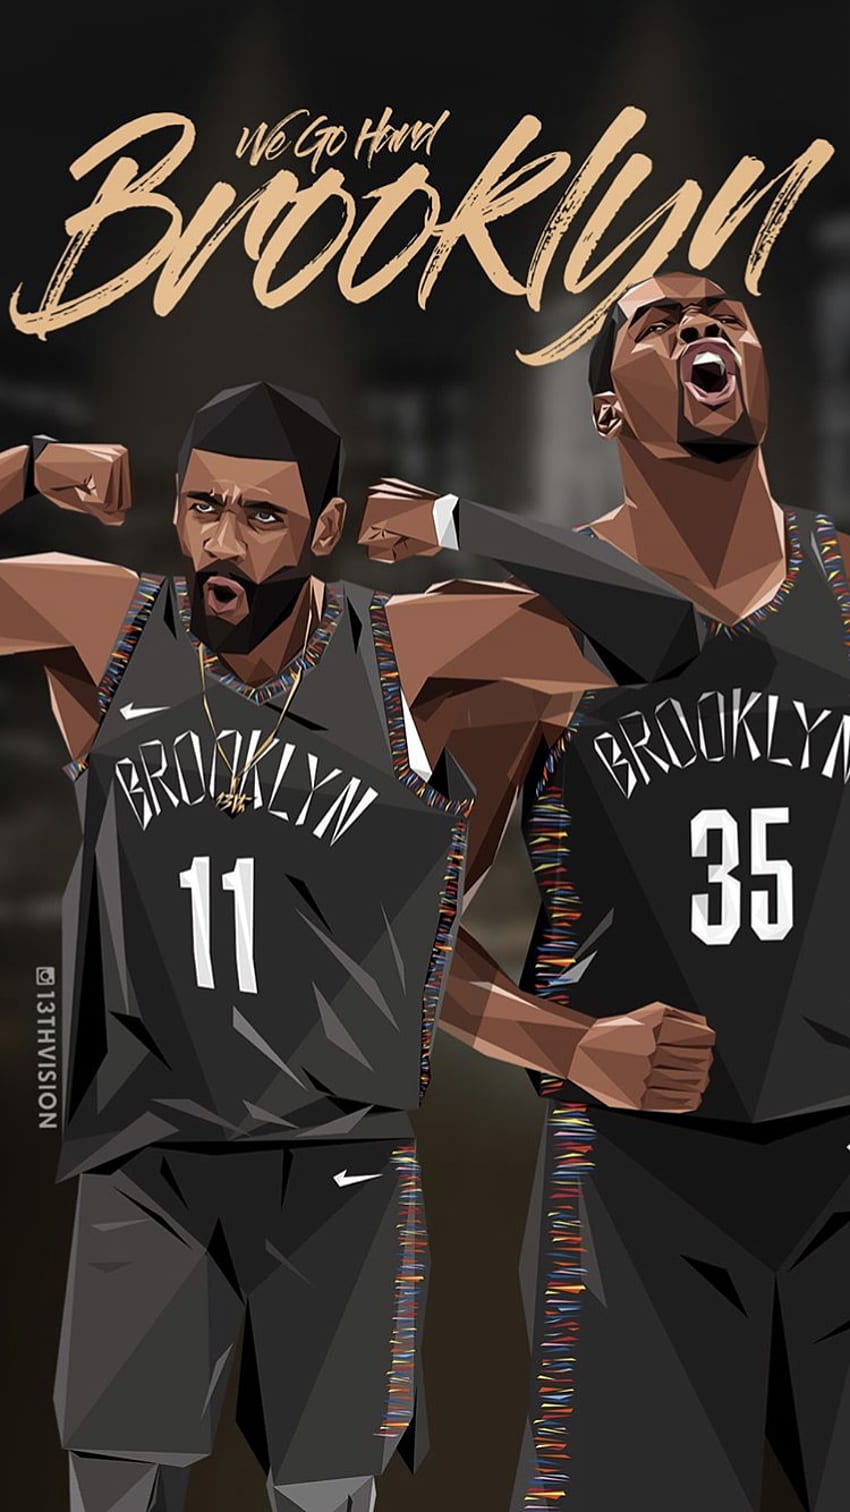 Wallpaper  Kevin Durant kyrie irving basketball Brooklyn Nets Uncle  Drew 2535x1430  LFHxRiCh1x  2209635  HD Wallpapers  WallHere